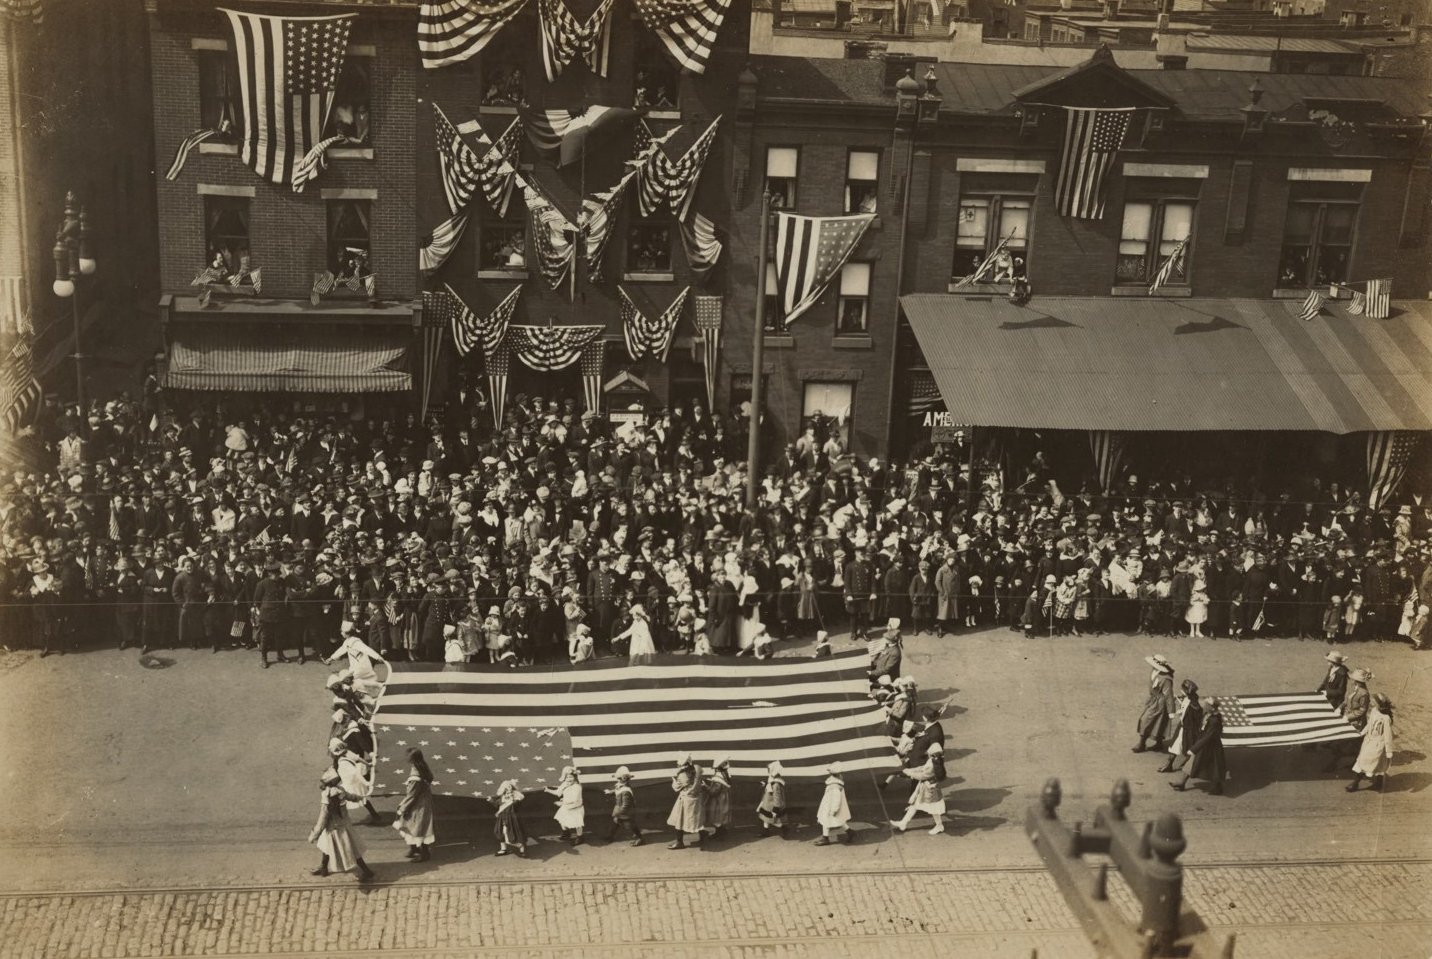 Parade from 1918 in the streets with people carrying a large American flag